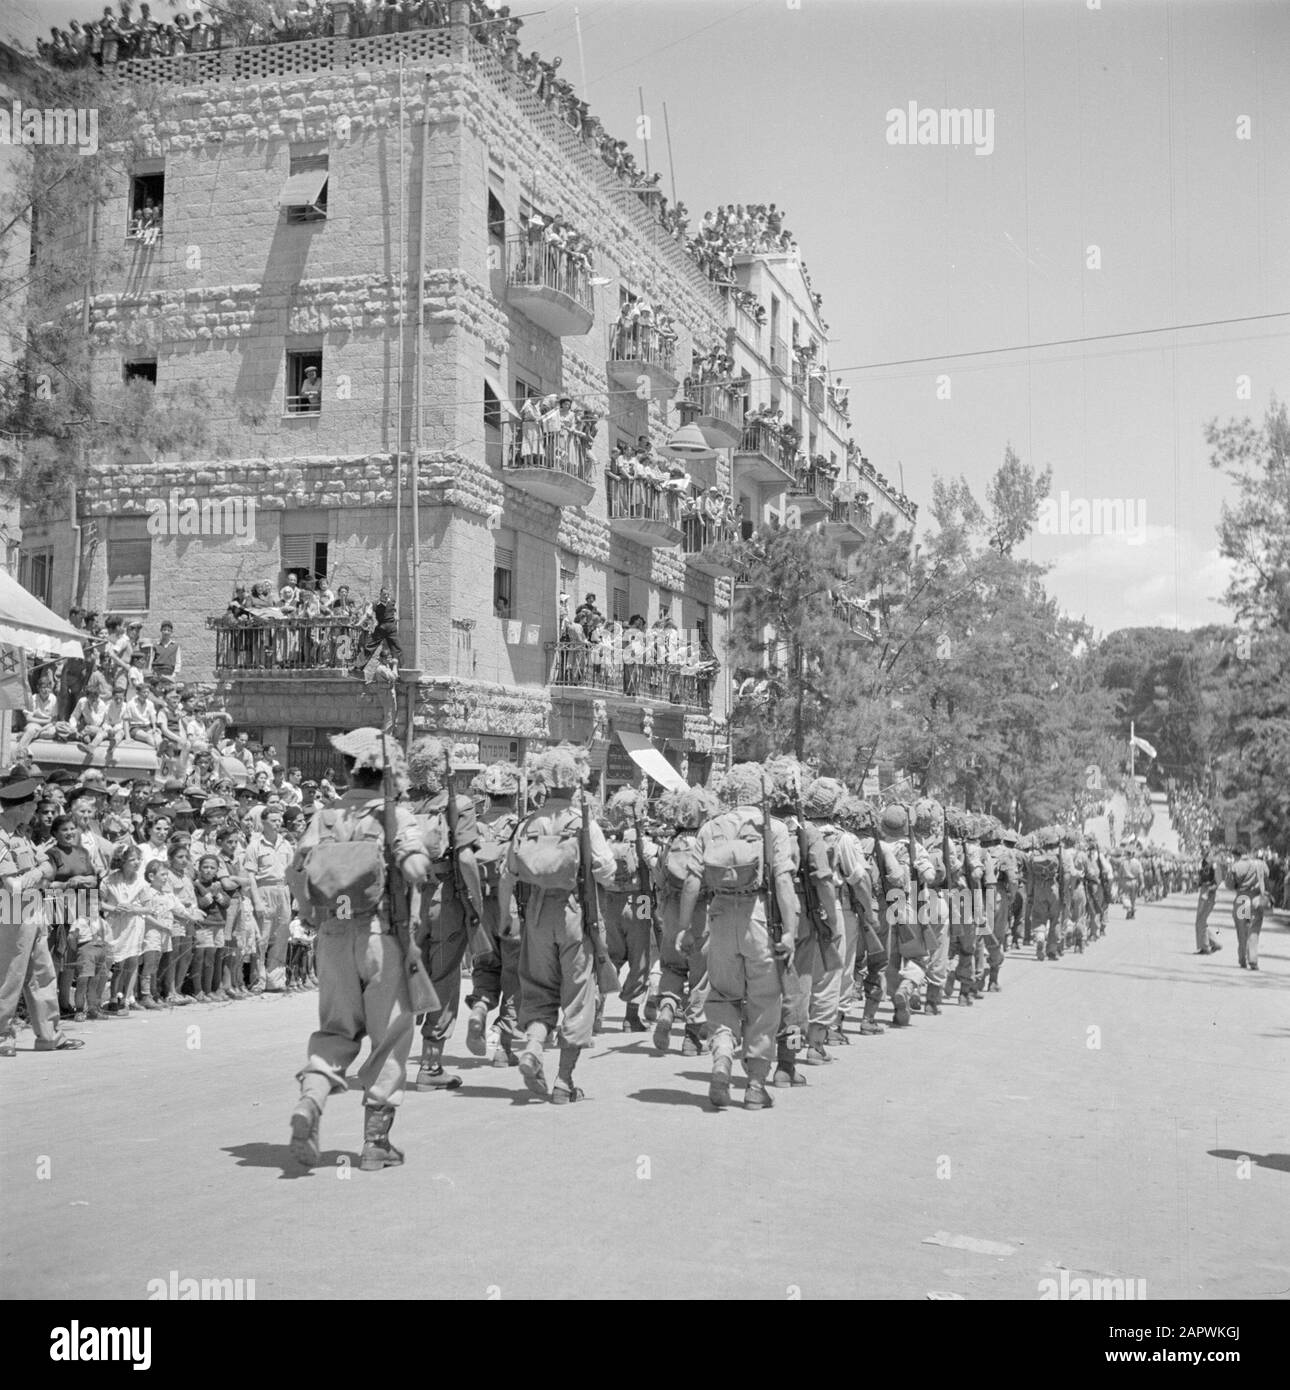 Israel 1948-1949: Jerusalem  Military unit during the military parade on May 15, 1949 in Jerusalem on the occasion of the first anniversary of Israel's independence Date: 23 Apr 1950 Location: Israel, Jerusalem Keywords: architecture, military parades, military, national holidays, public, uniforms, weapons Stock Photo